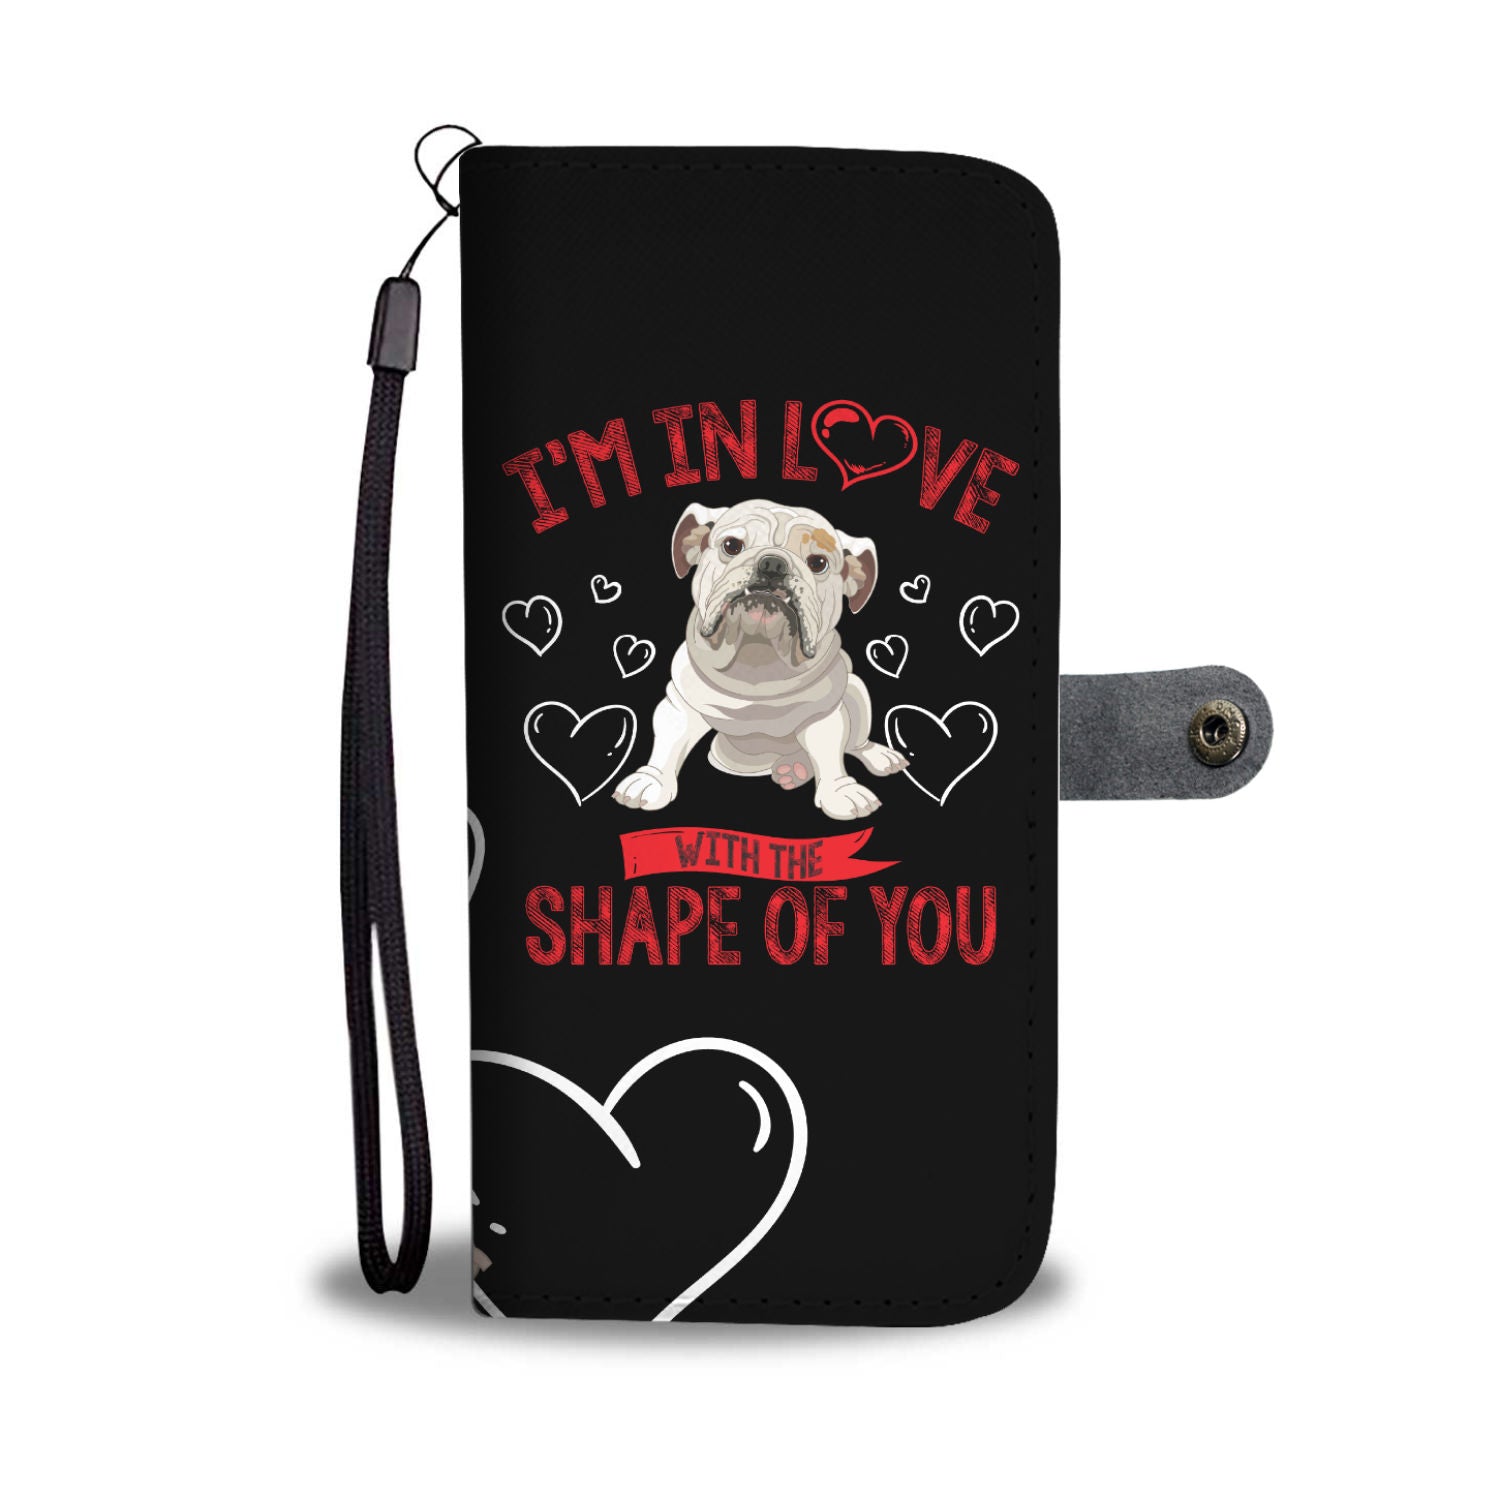 In Love with The Shape of You Wallet Phone Case